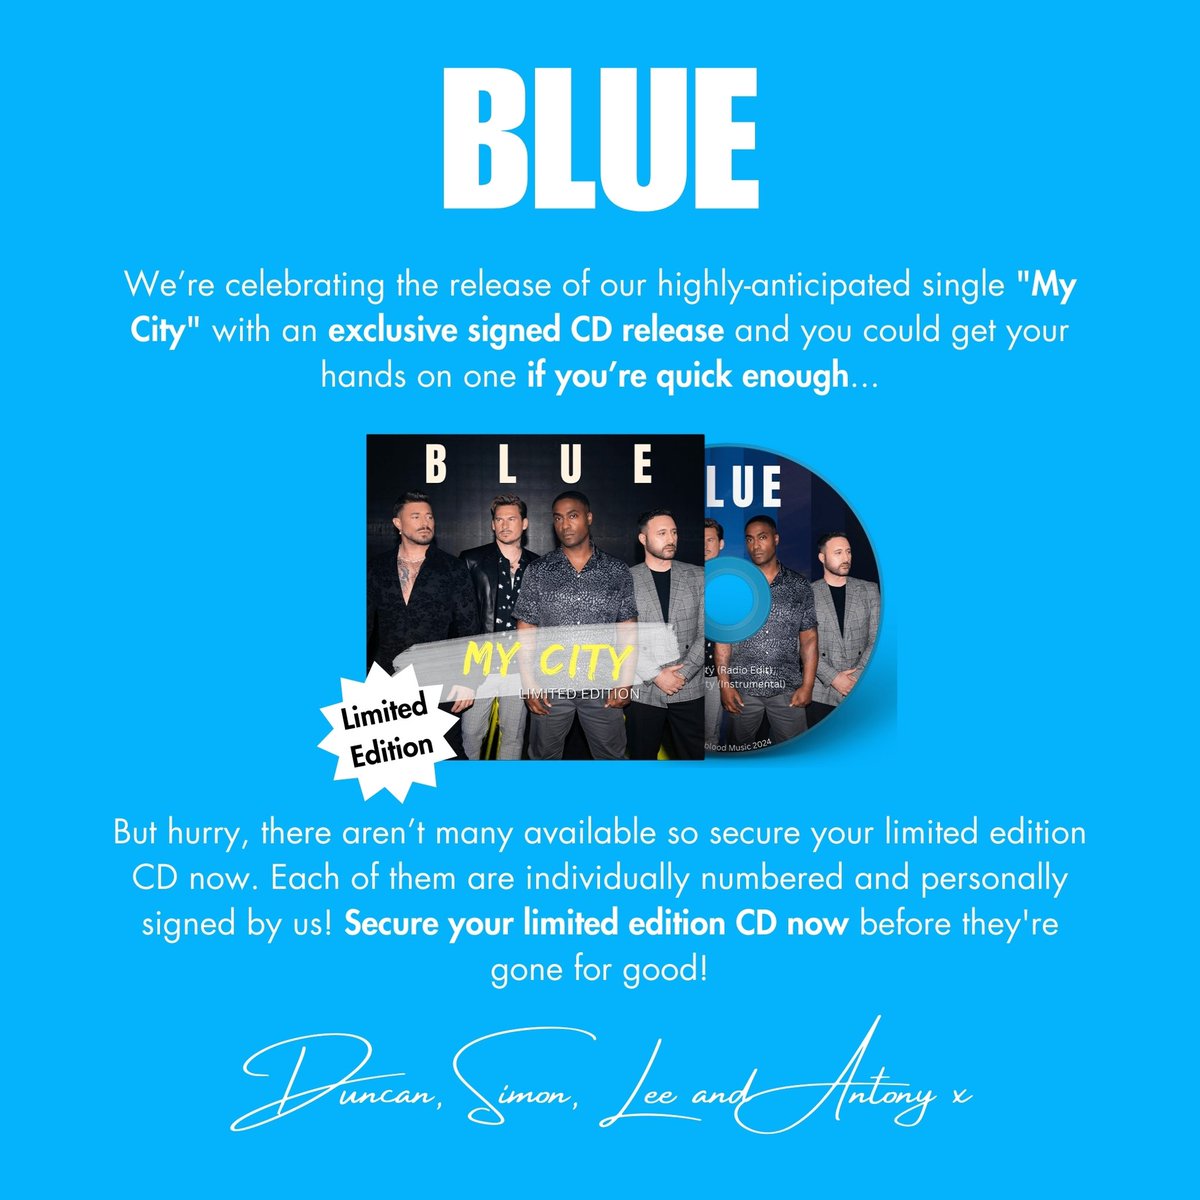 Exciting news! We’re celebrating the release of our new single “My City” with an exclusive signed CD release!

You know what you need to do... 👀 Be quick! Secure your limited edition signed CD now before they’re gone!

👉 blue.tmstor.es

Duncan, Simon, Lee and Antony x